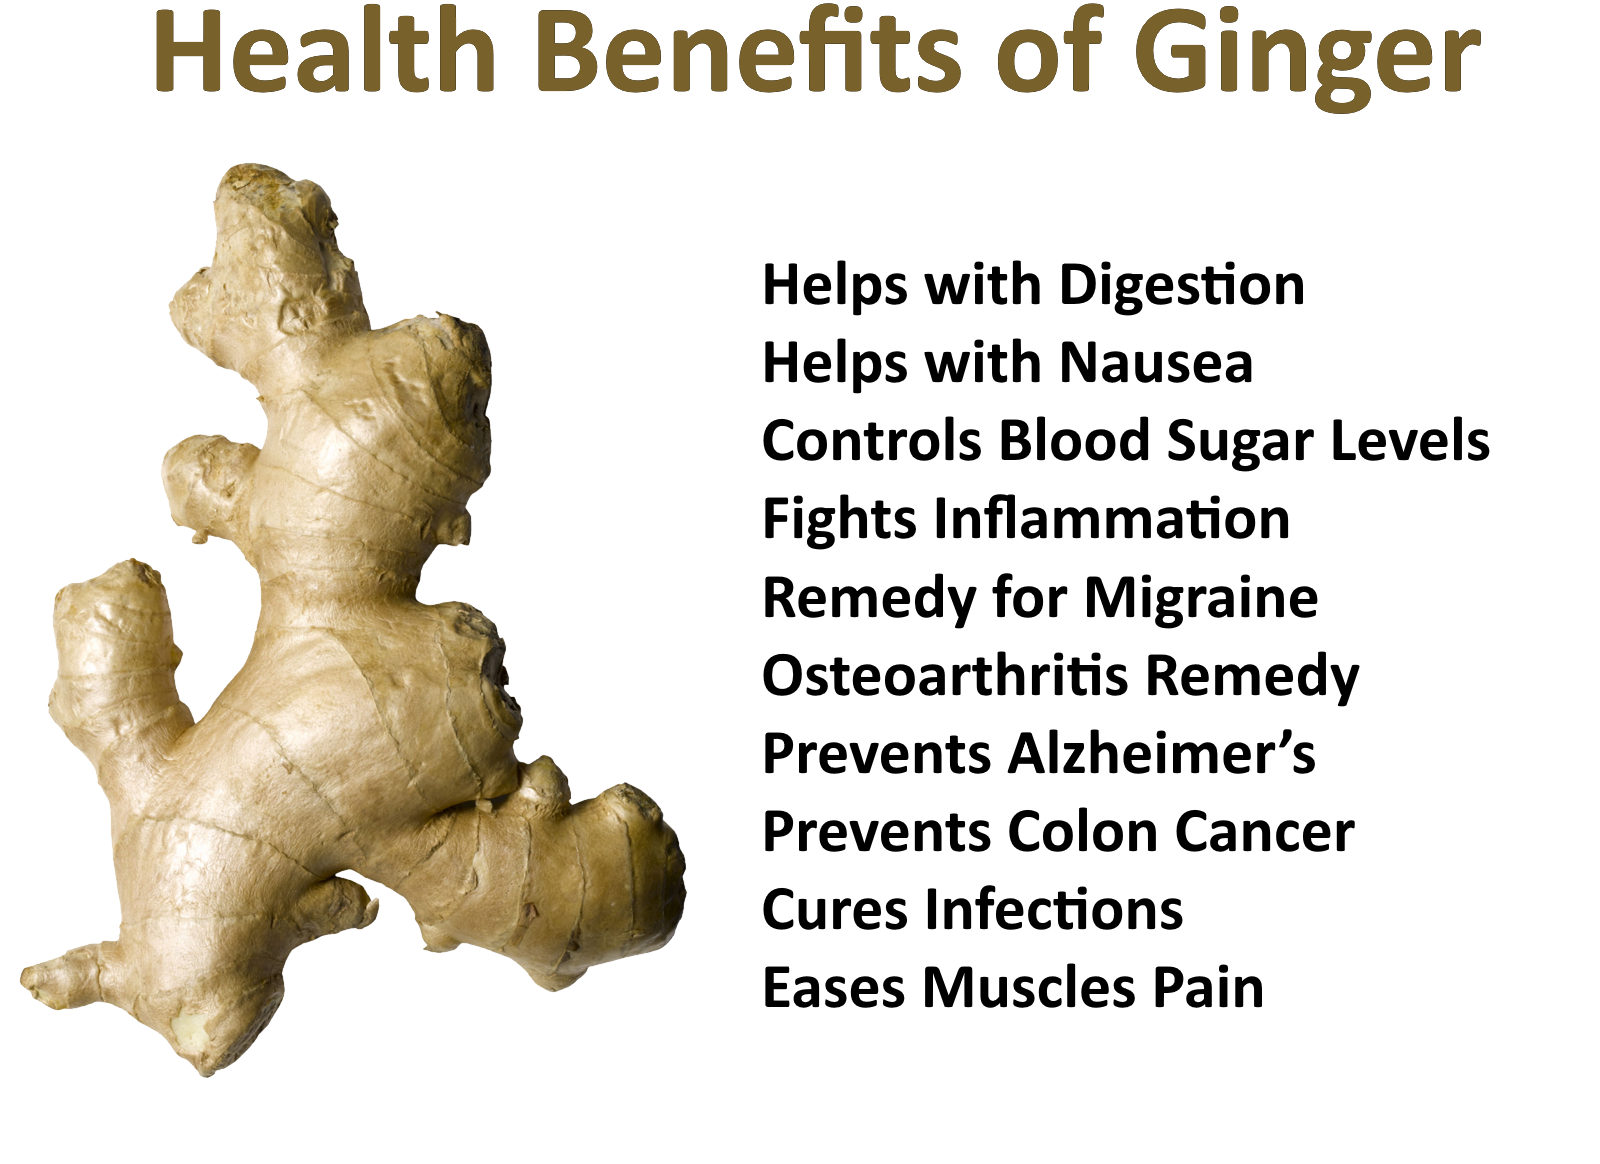 What happens if you eat ginger everyday?